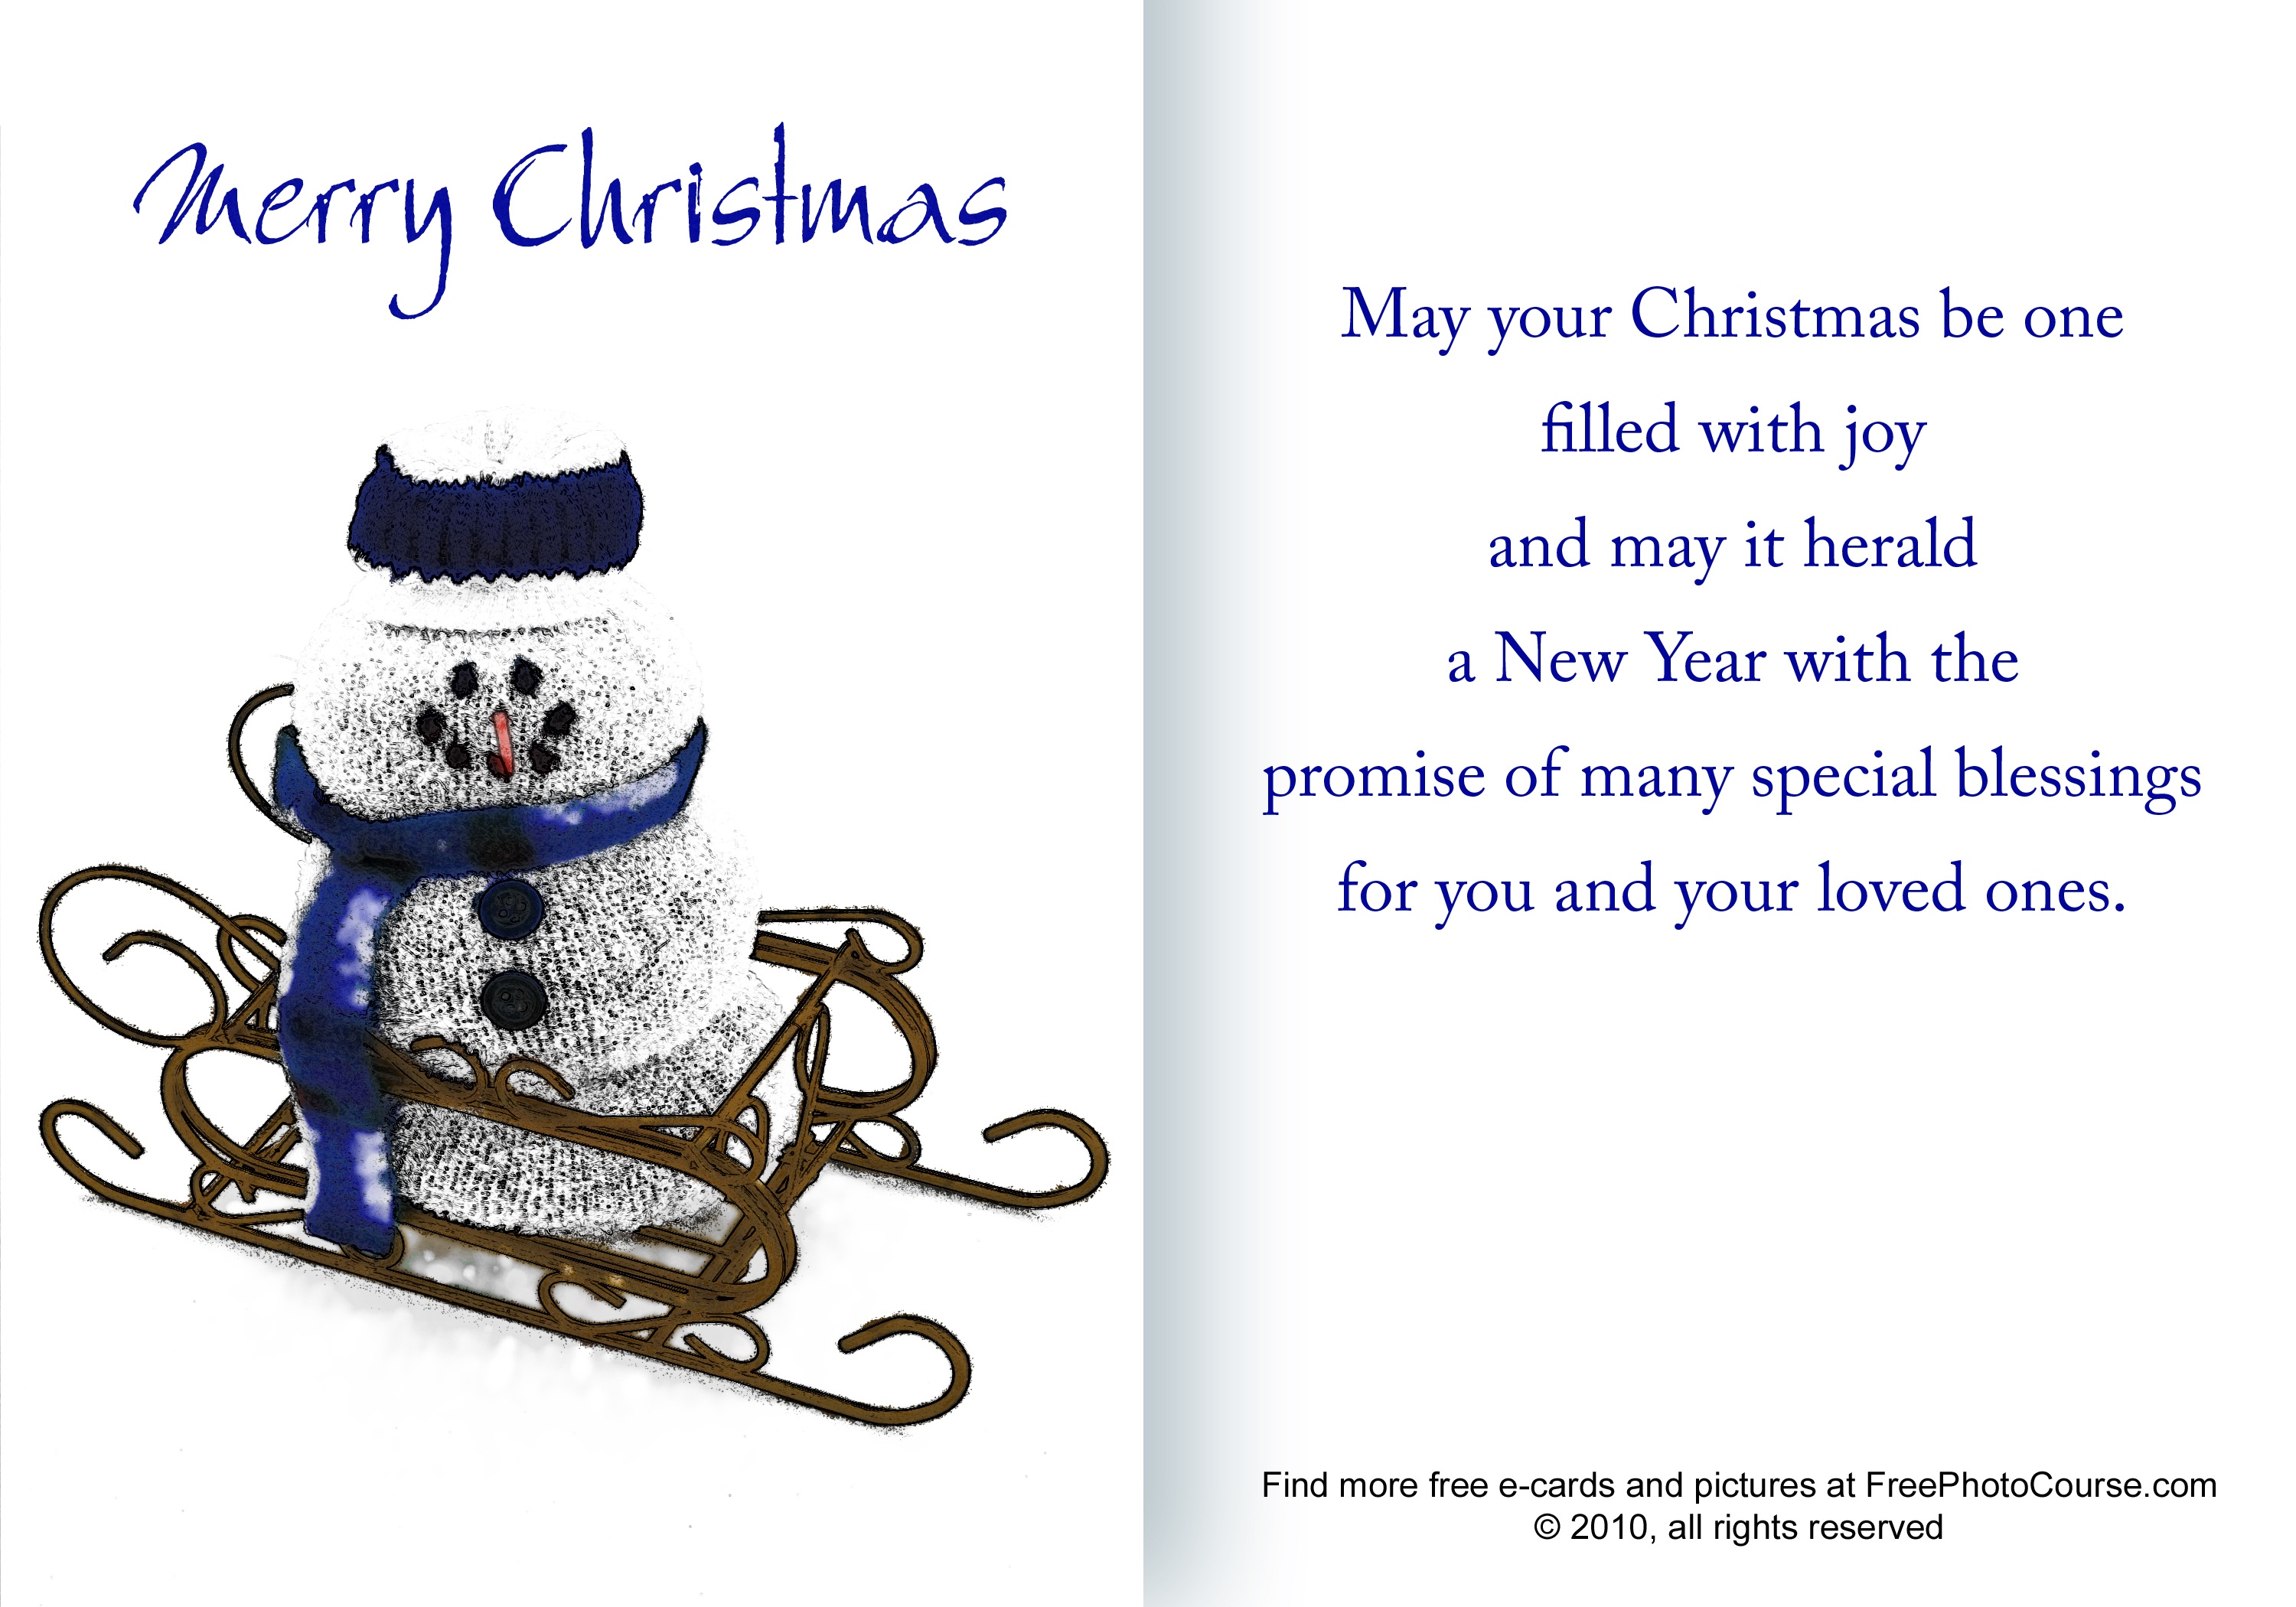 Free Christmas And Holiday Cards And Pictures - Free Online Printable Christmas Cards